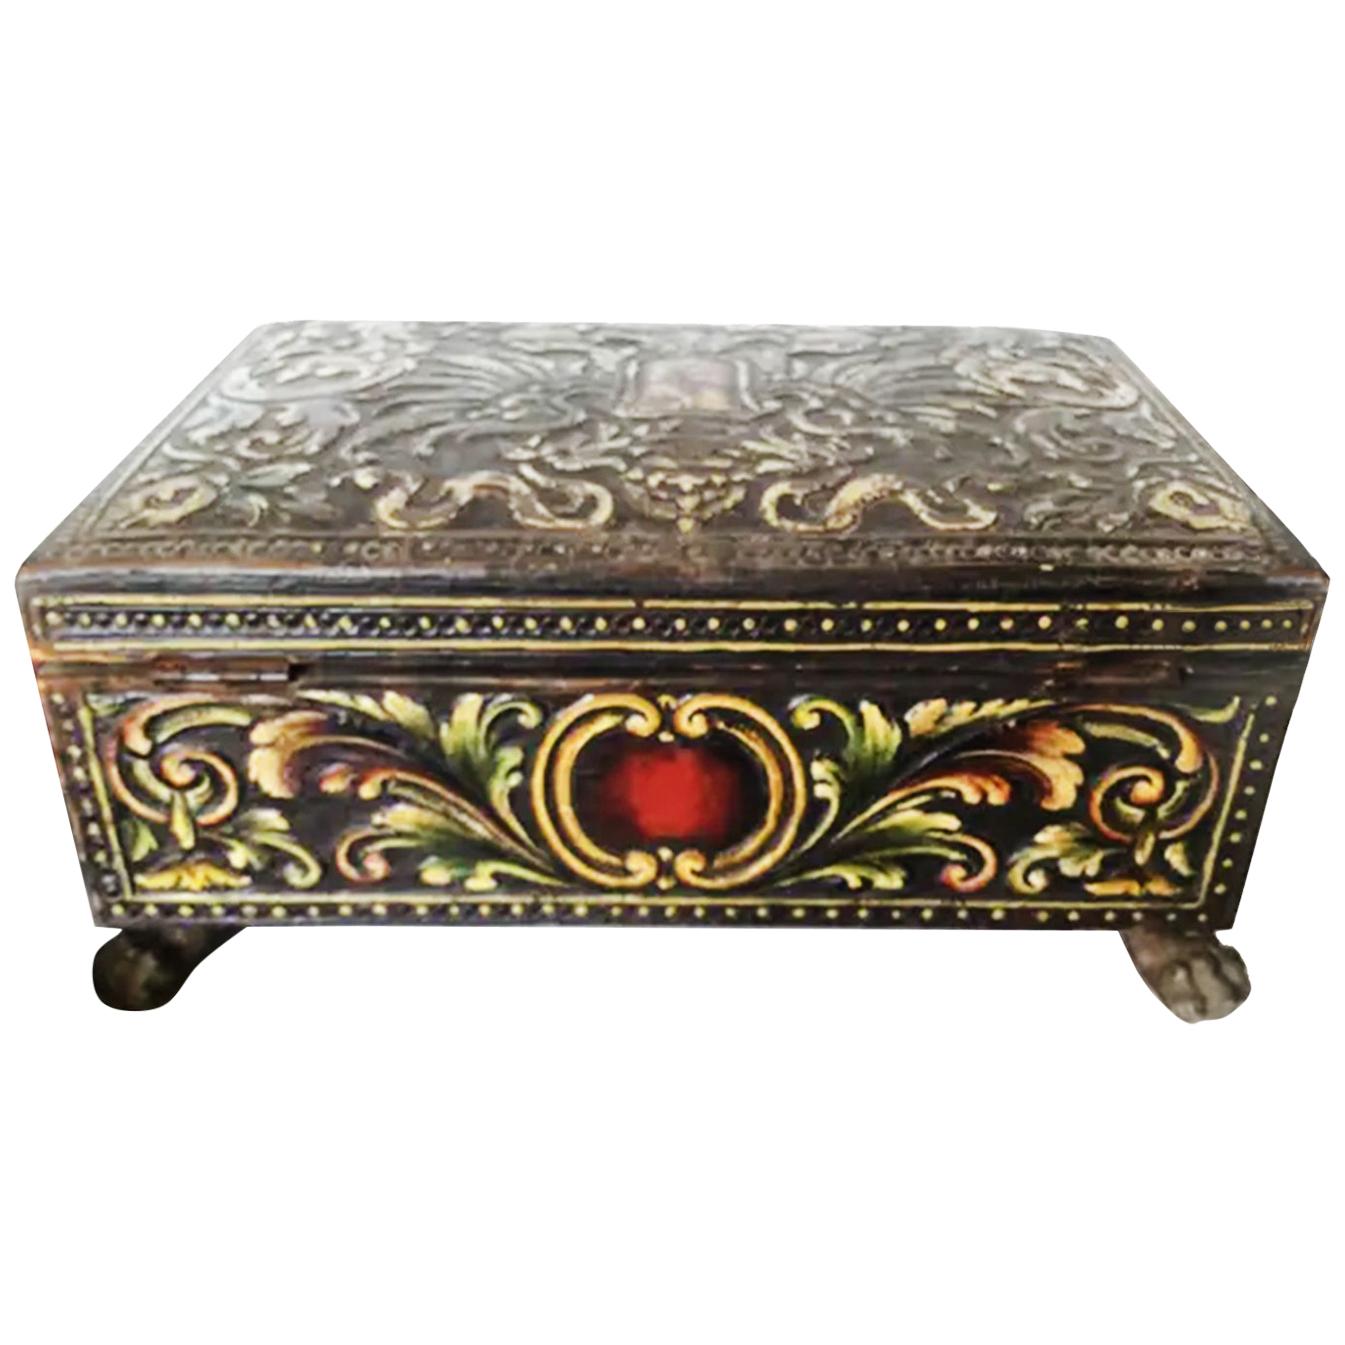 Box Lined with Hand-Embossed Leather 'Cordoman' and Silk Velvet, 18th Century